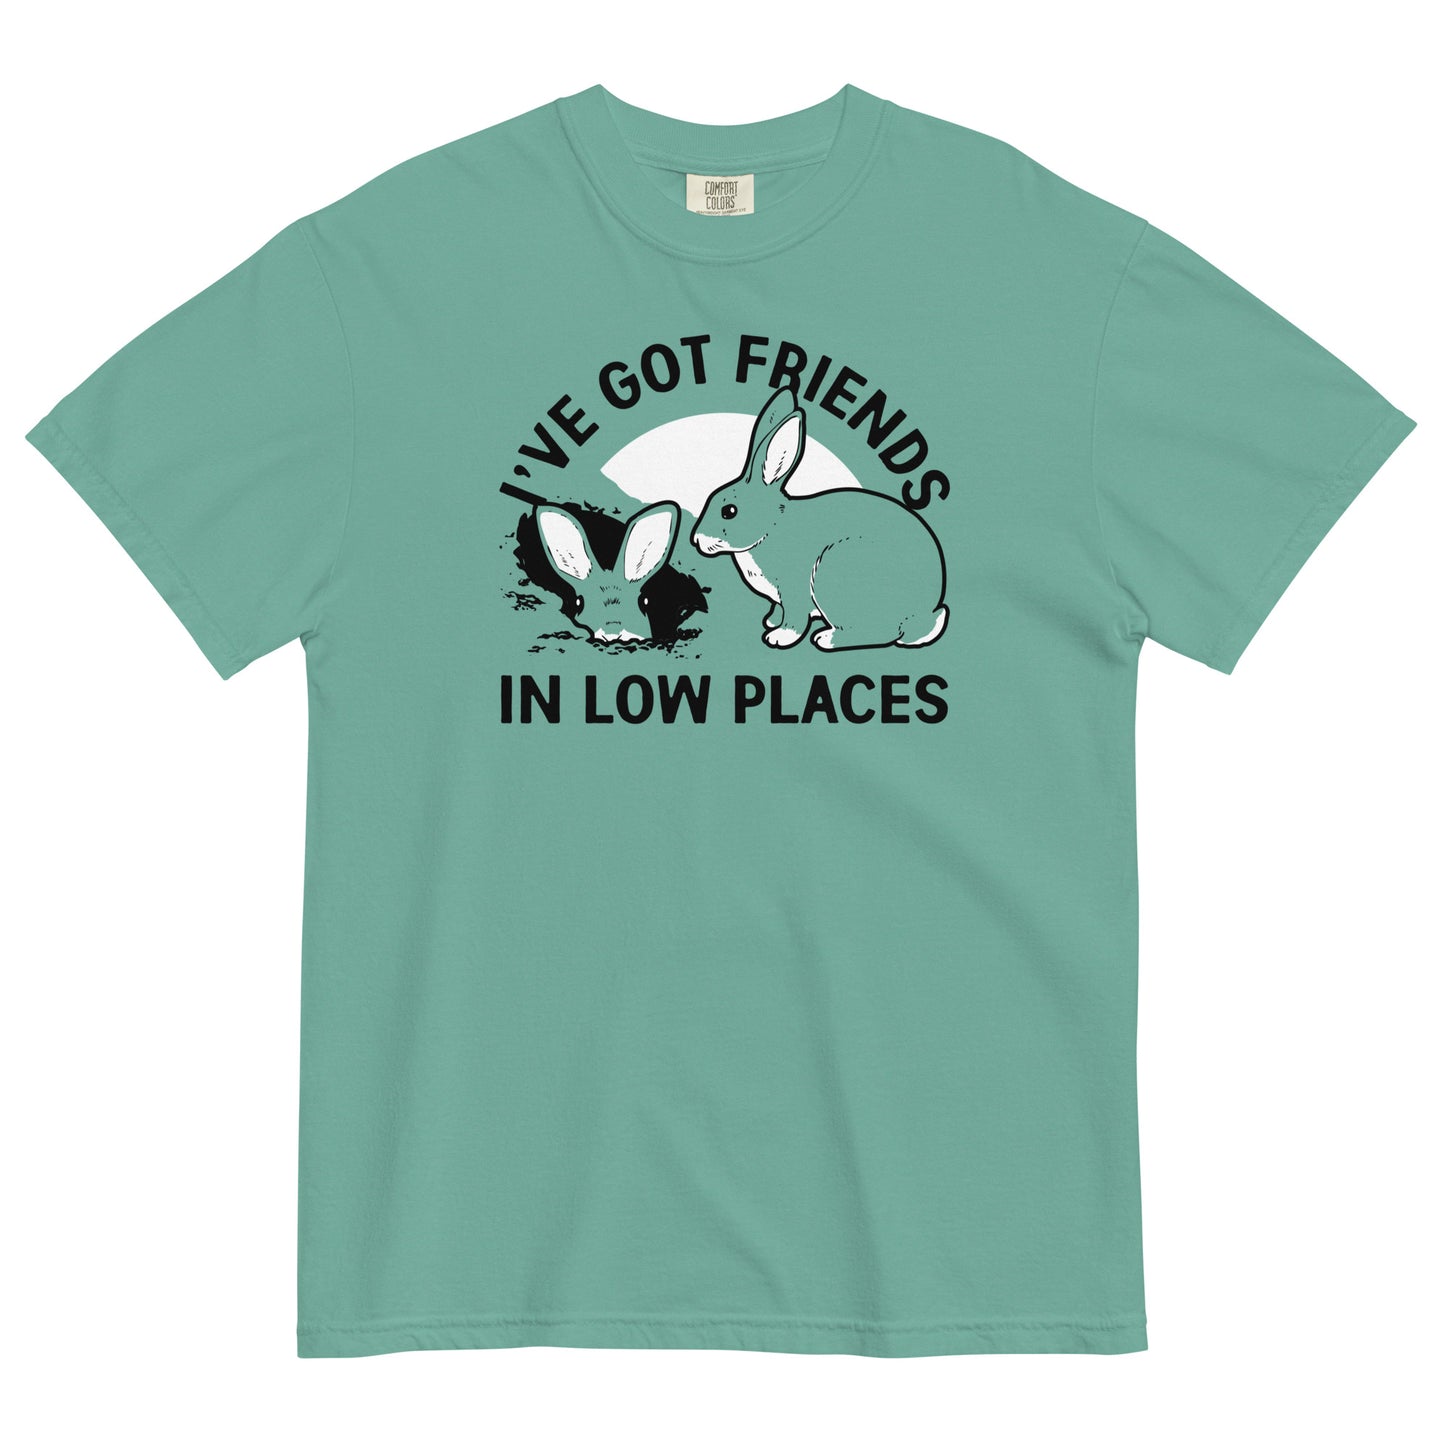 I've Got Friends In Low Places Men's Relaxed Fit Tee